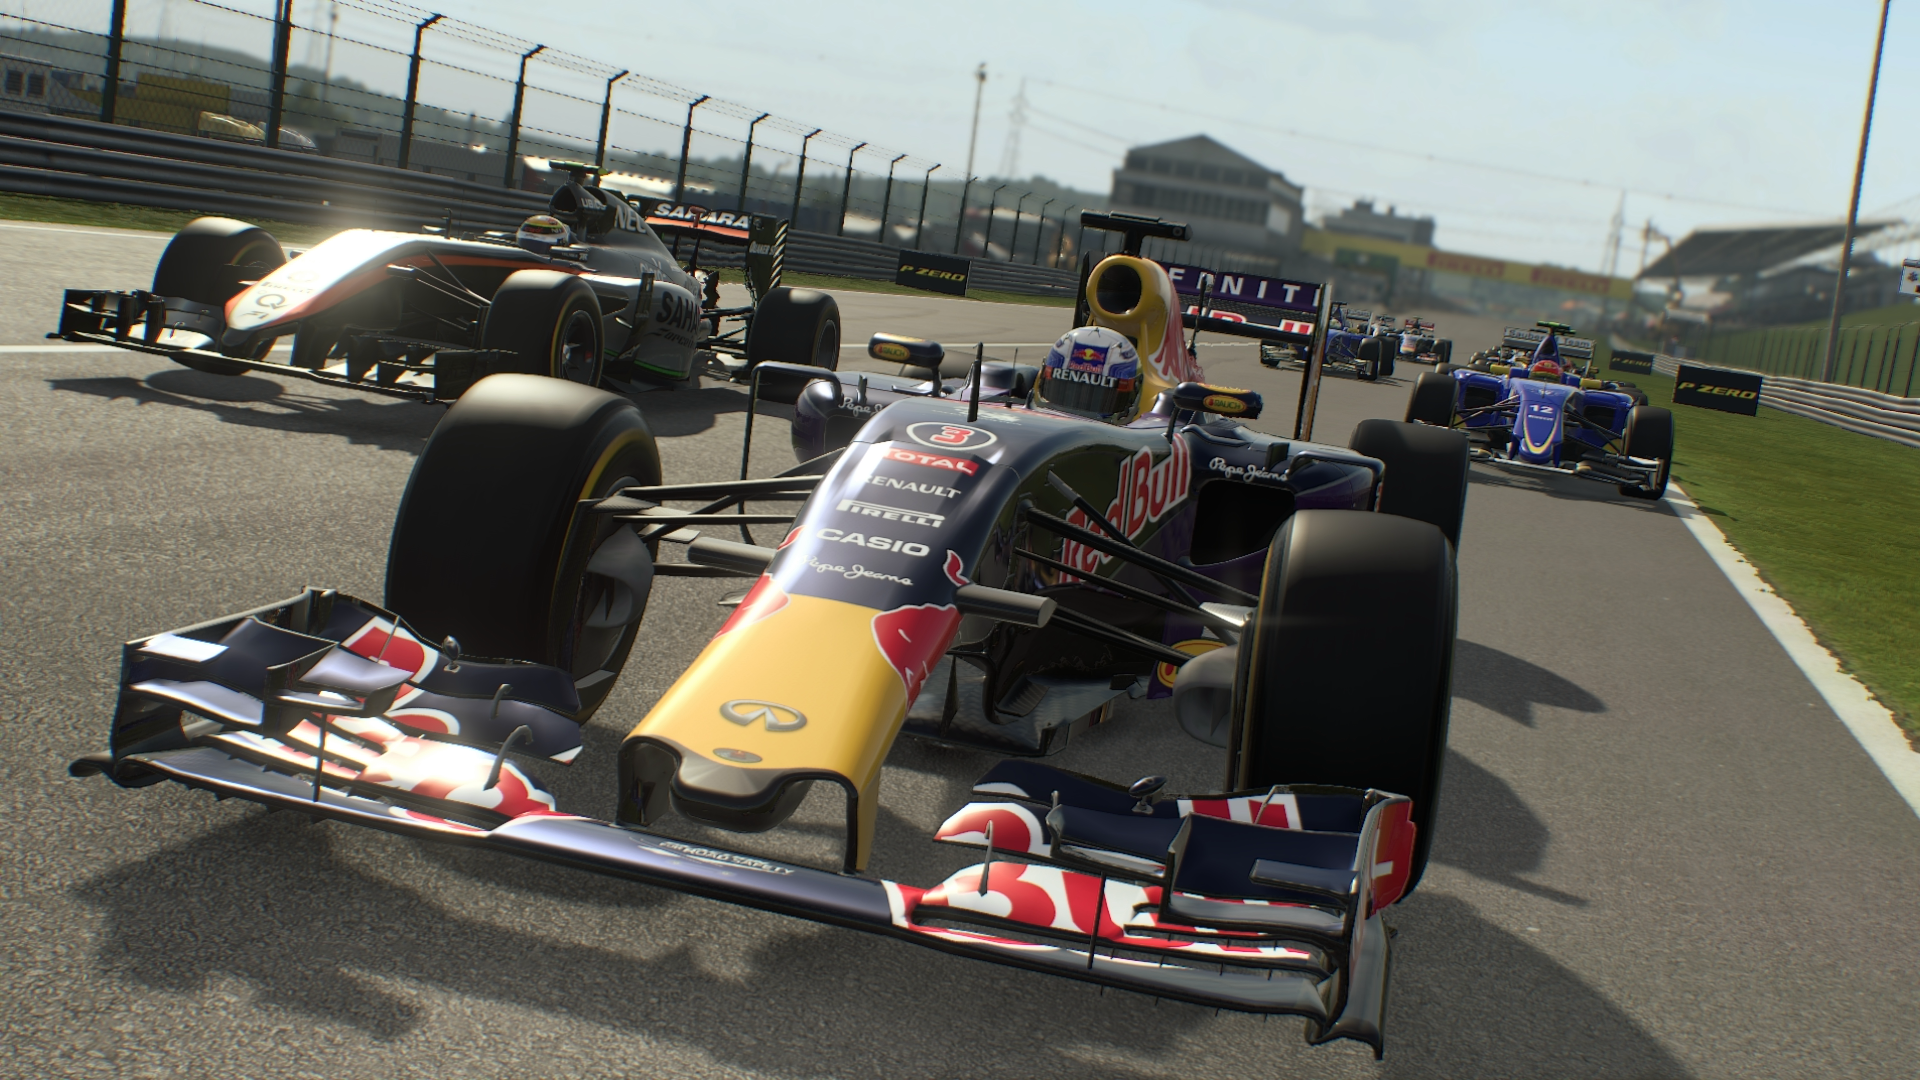 The Official F1 2015 System Requirements Are Presented Game News Gamespace